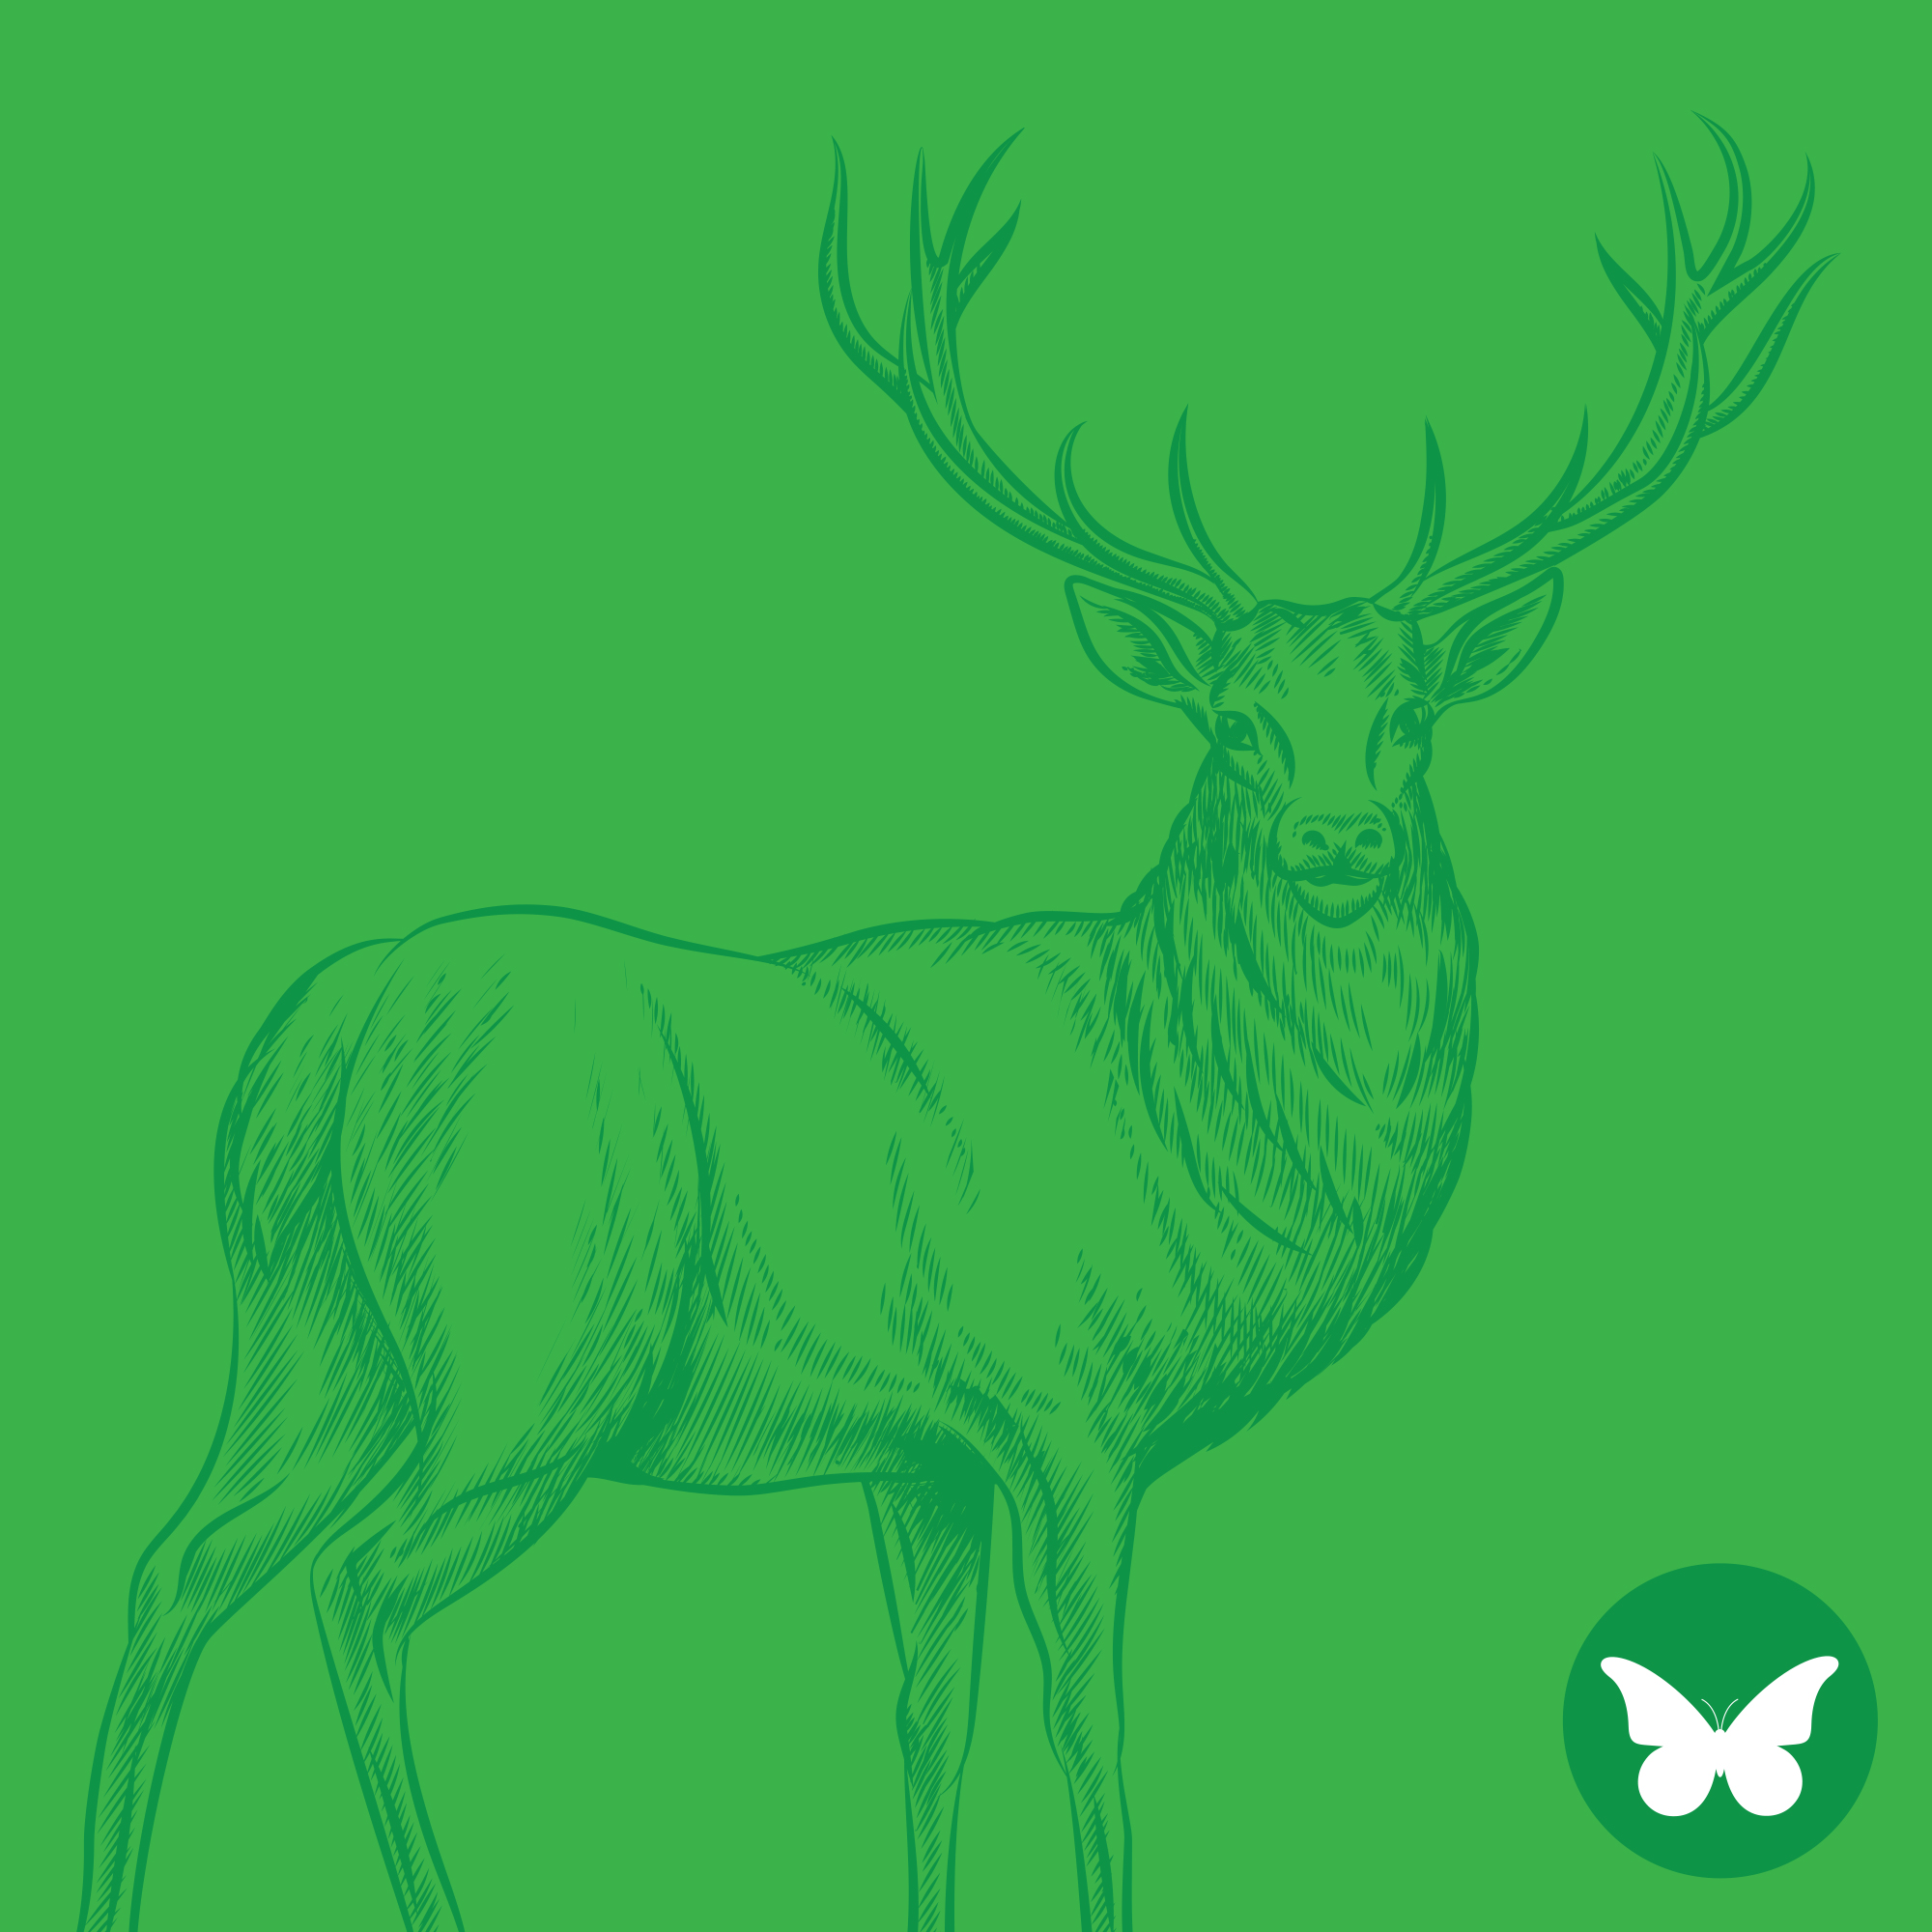 Profile illustration of a deer with a green background.